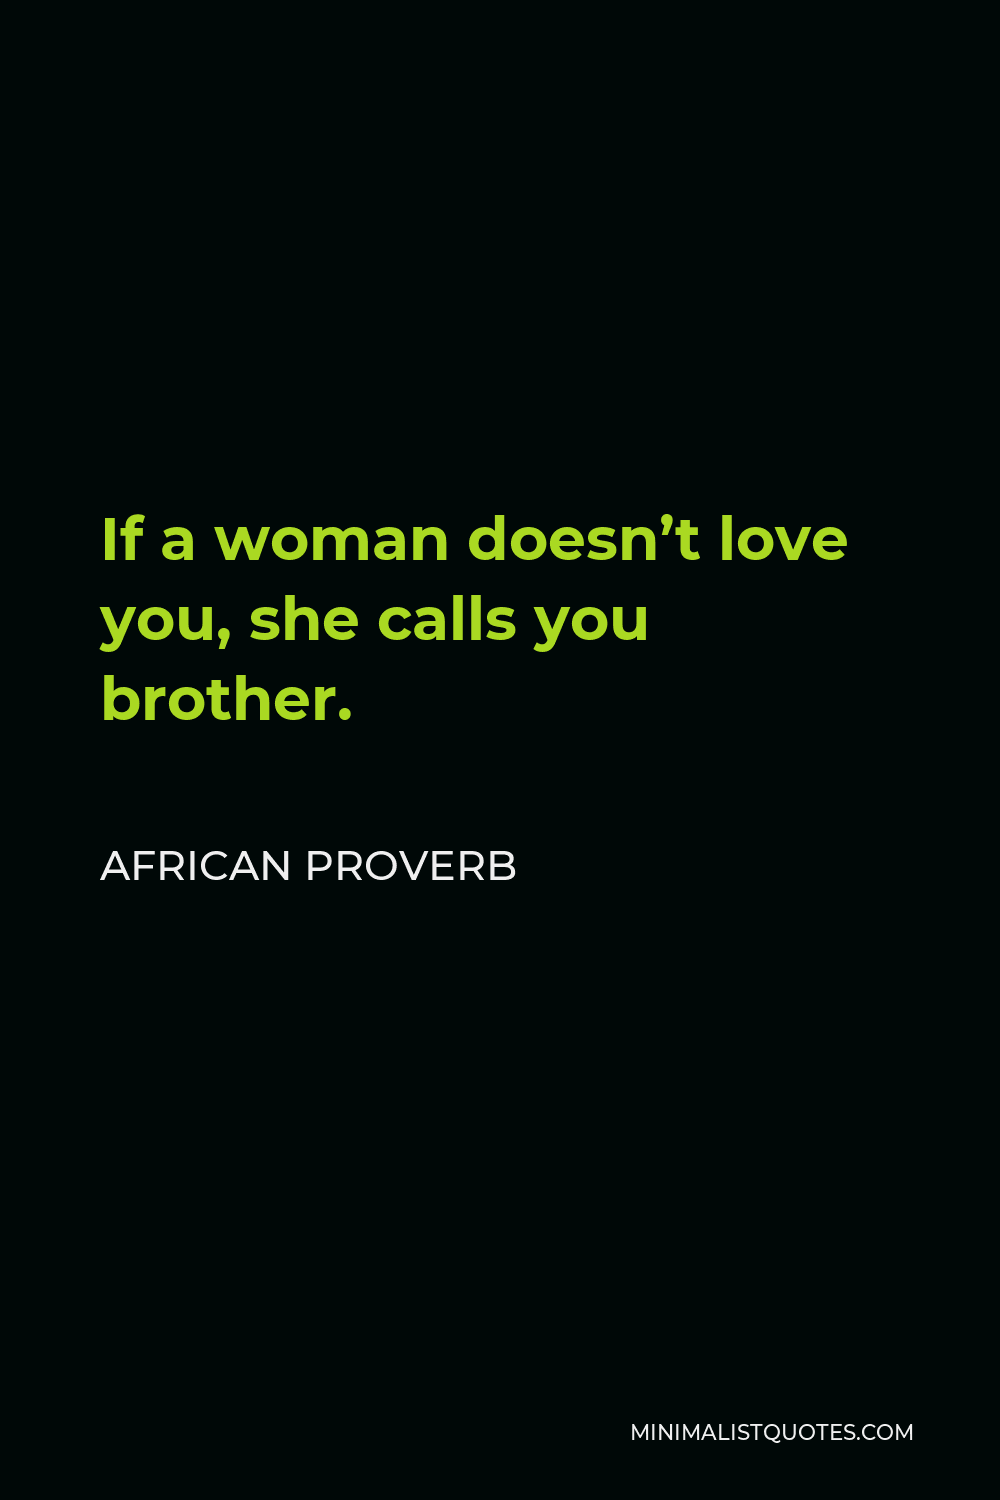 African Proverb Quote - If a woman doesn’t love you, she calls you brother.